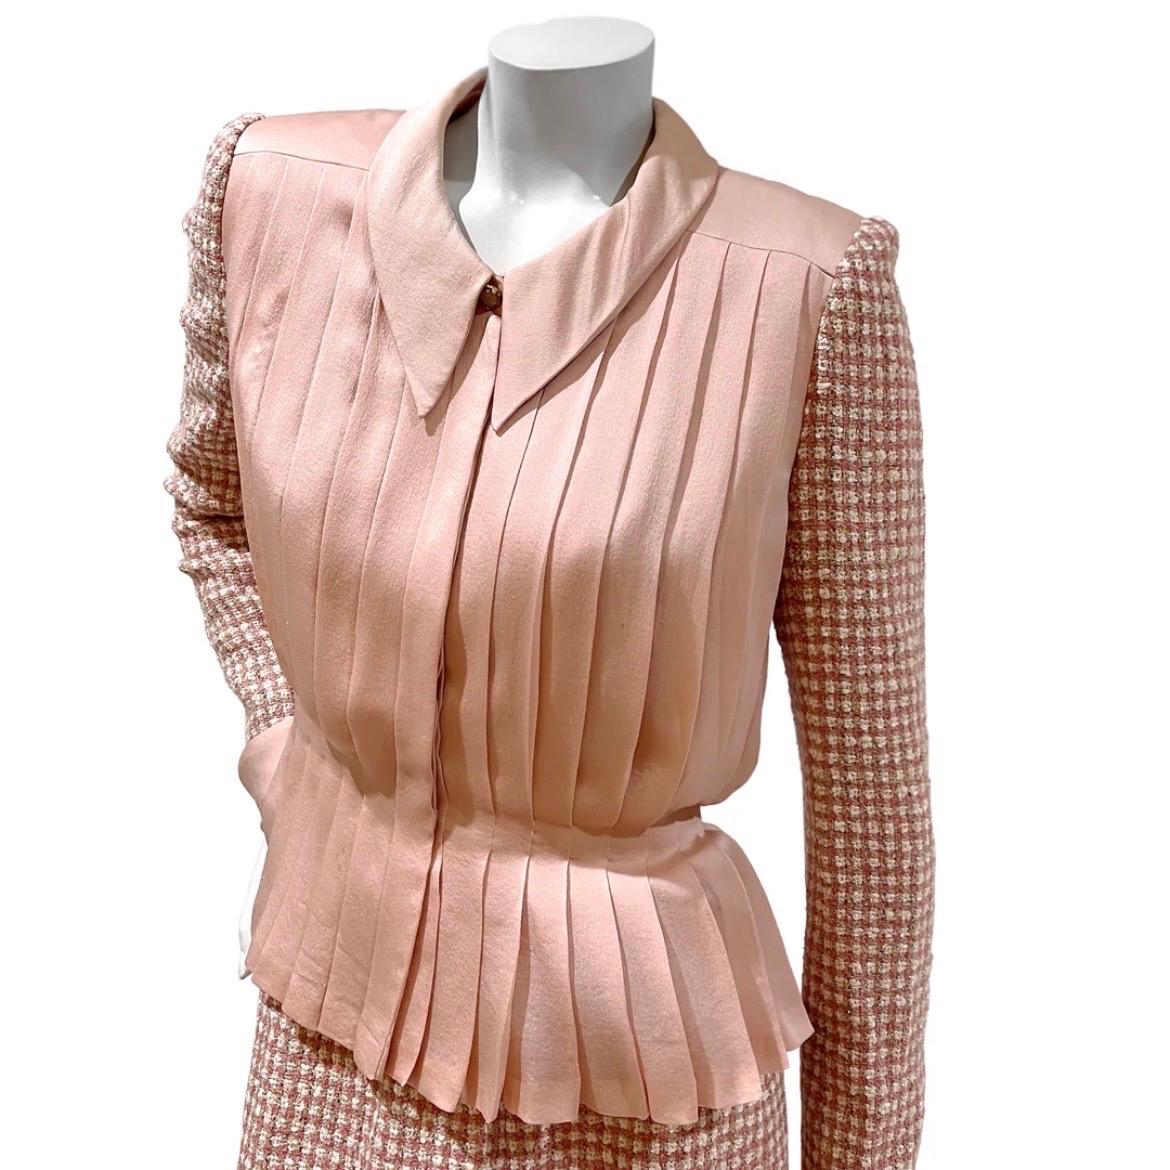 Vintage Haute Couture Skirt Suit by Chanel
Circa Late 1970's / Early 1980's
Pink, white, tan, and silver sparkle tweed  
Jacket: 
Flat collar
Light pink pleated silk bodice
Tweed sleeves
Hidden front button closure with decorative faux top button at